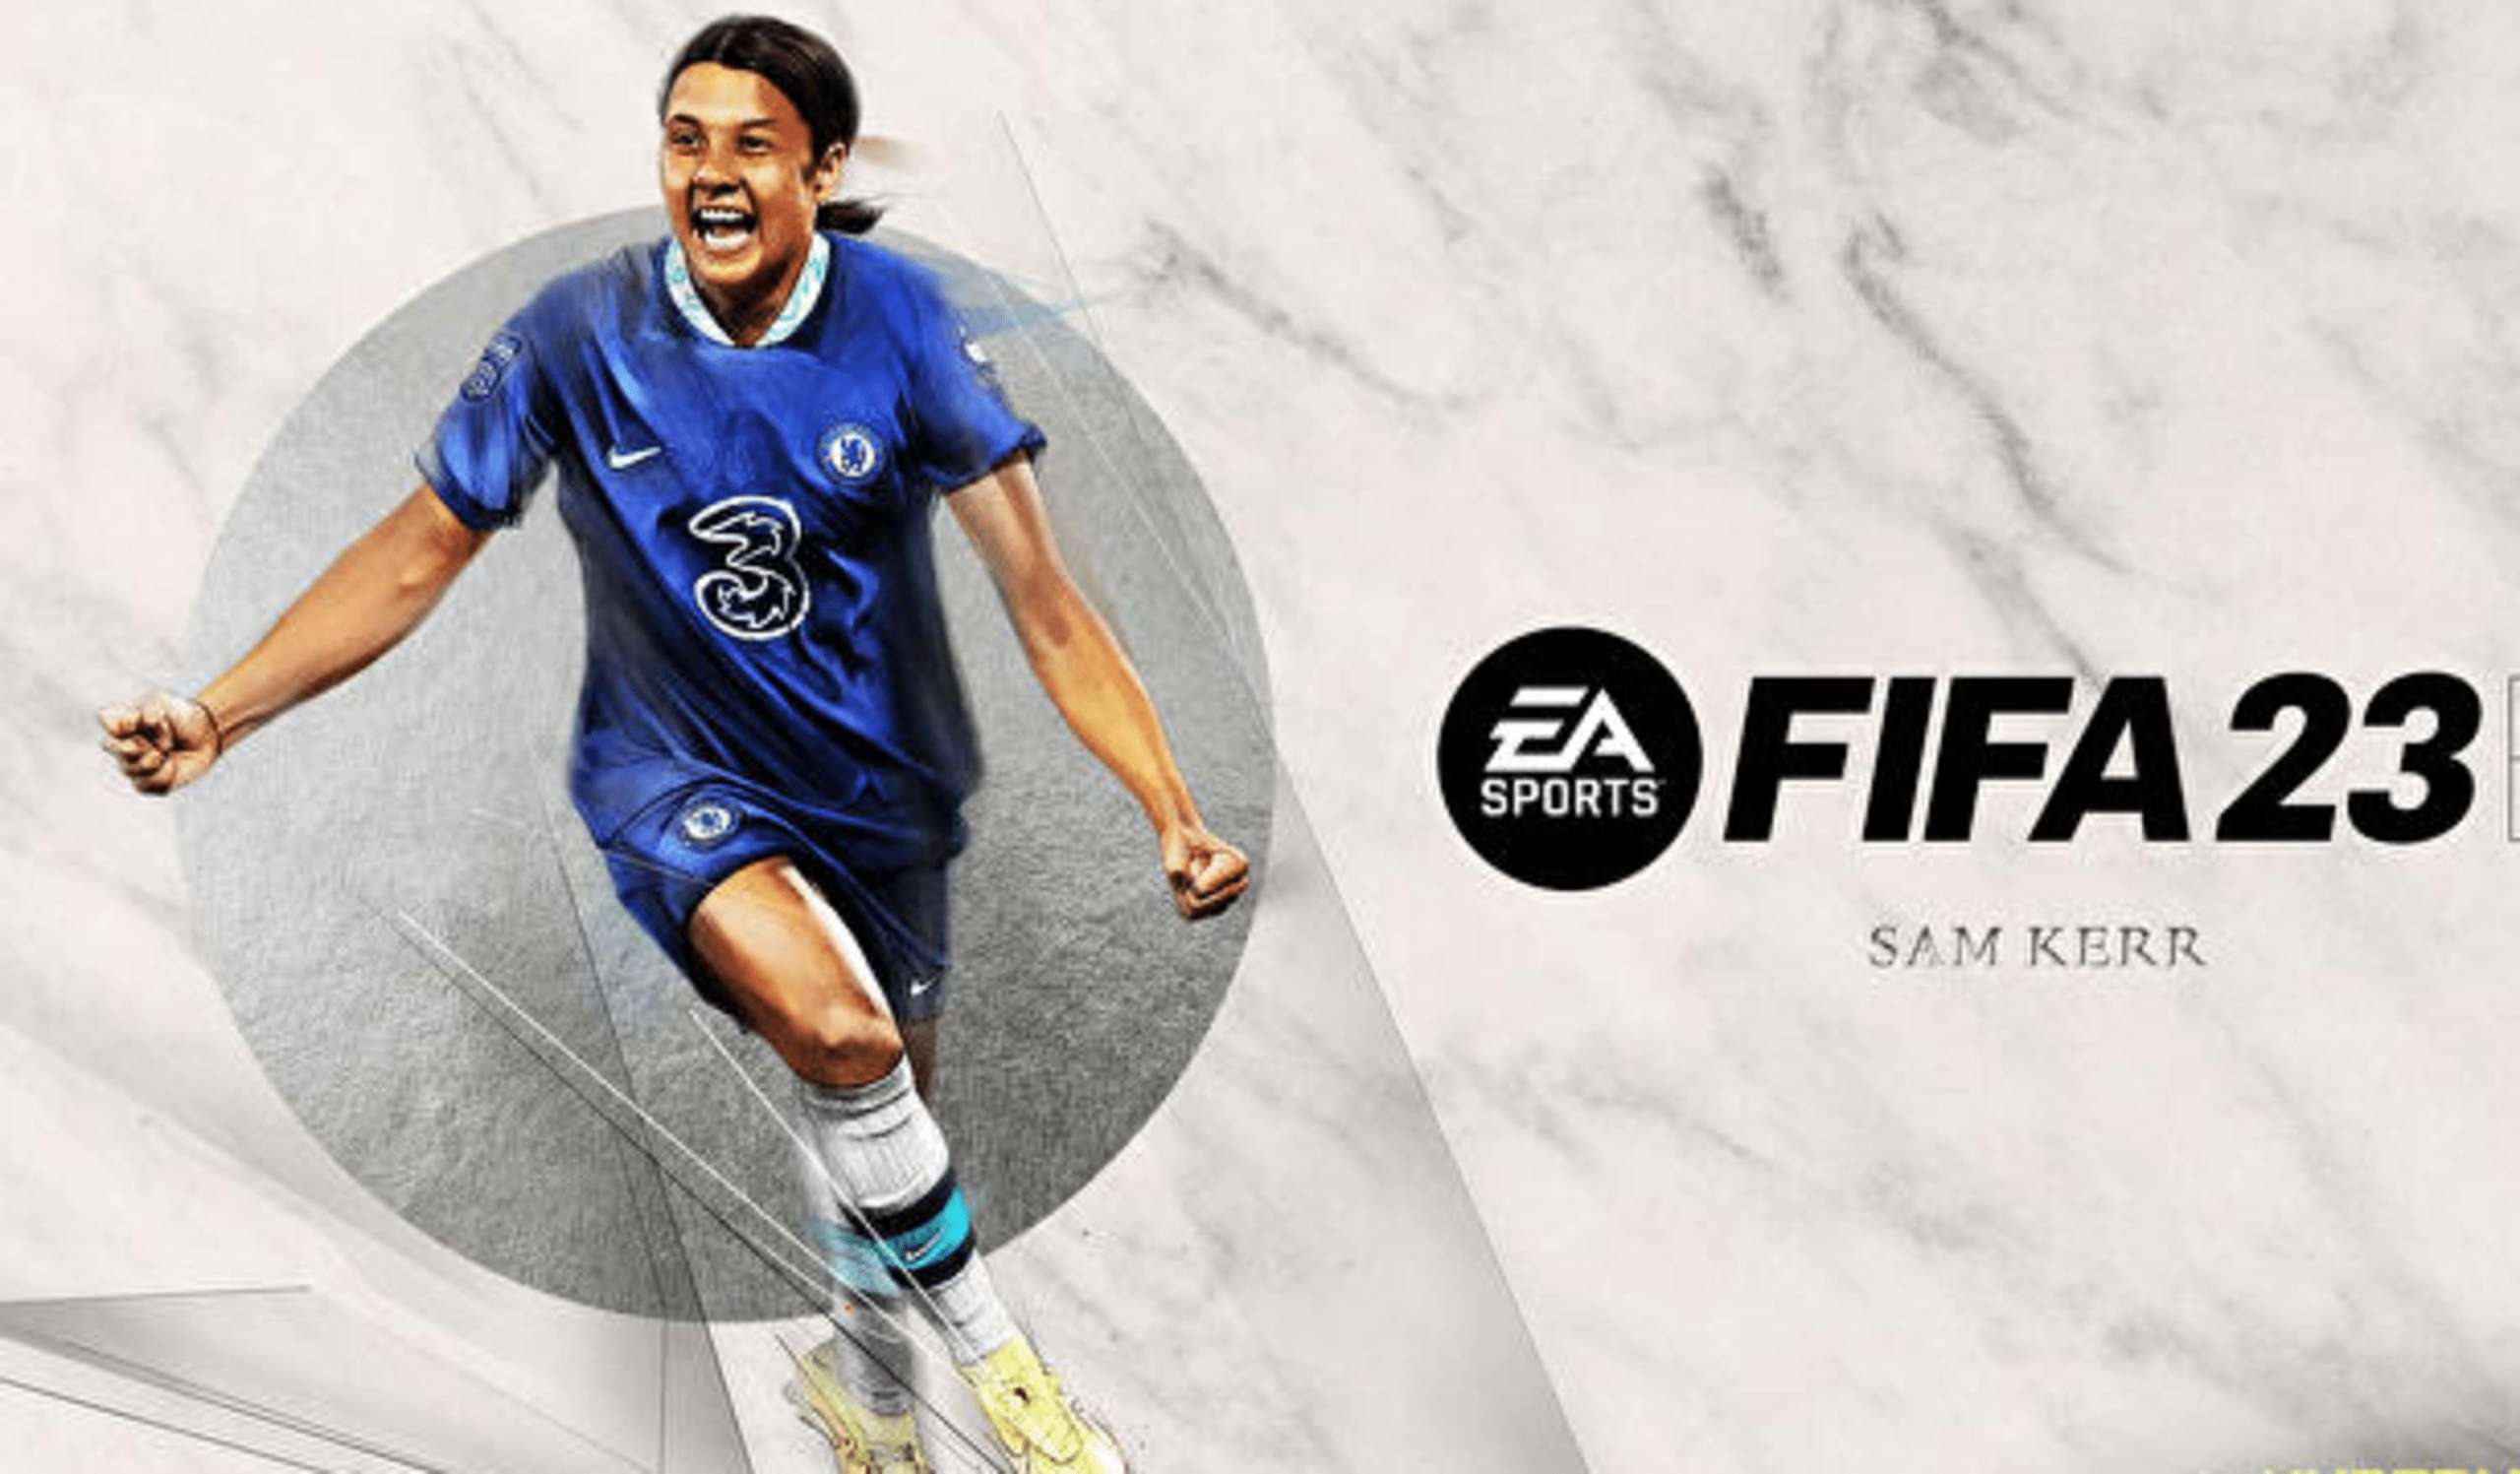 Loot Boxes Will Return In FIFA 23, According To EA, Which Also Justifies The Practice